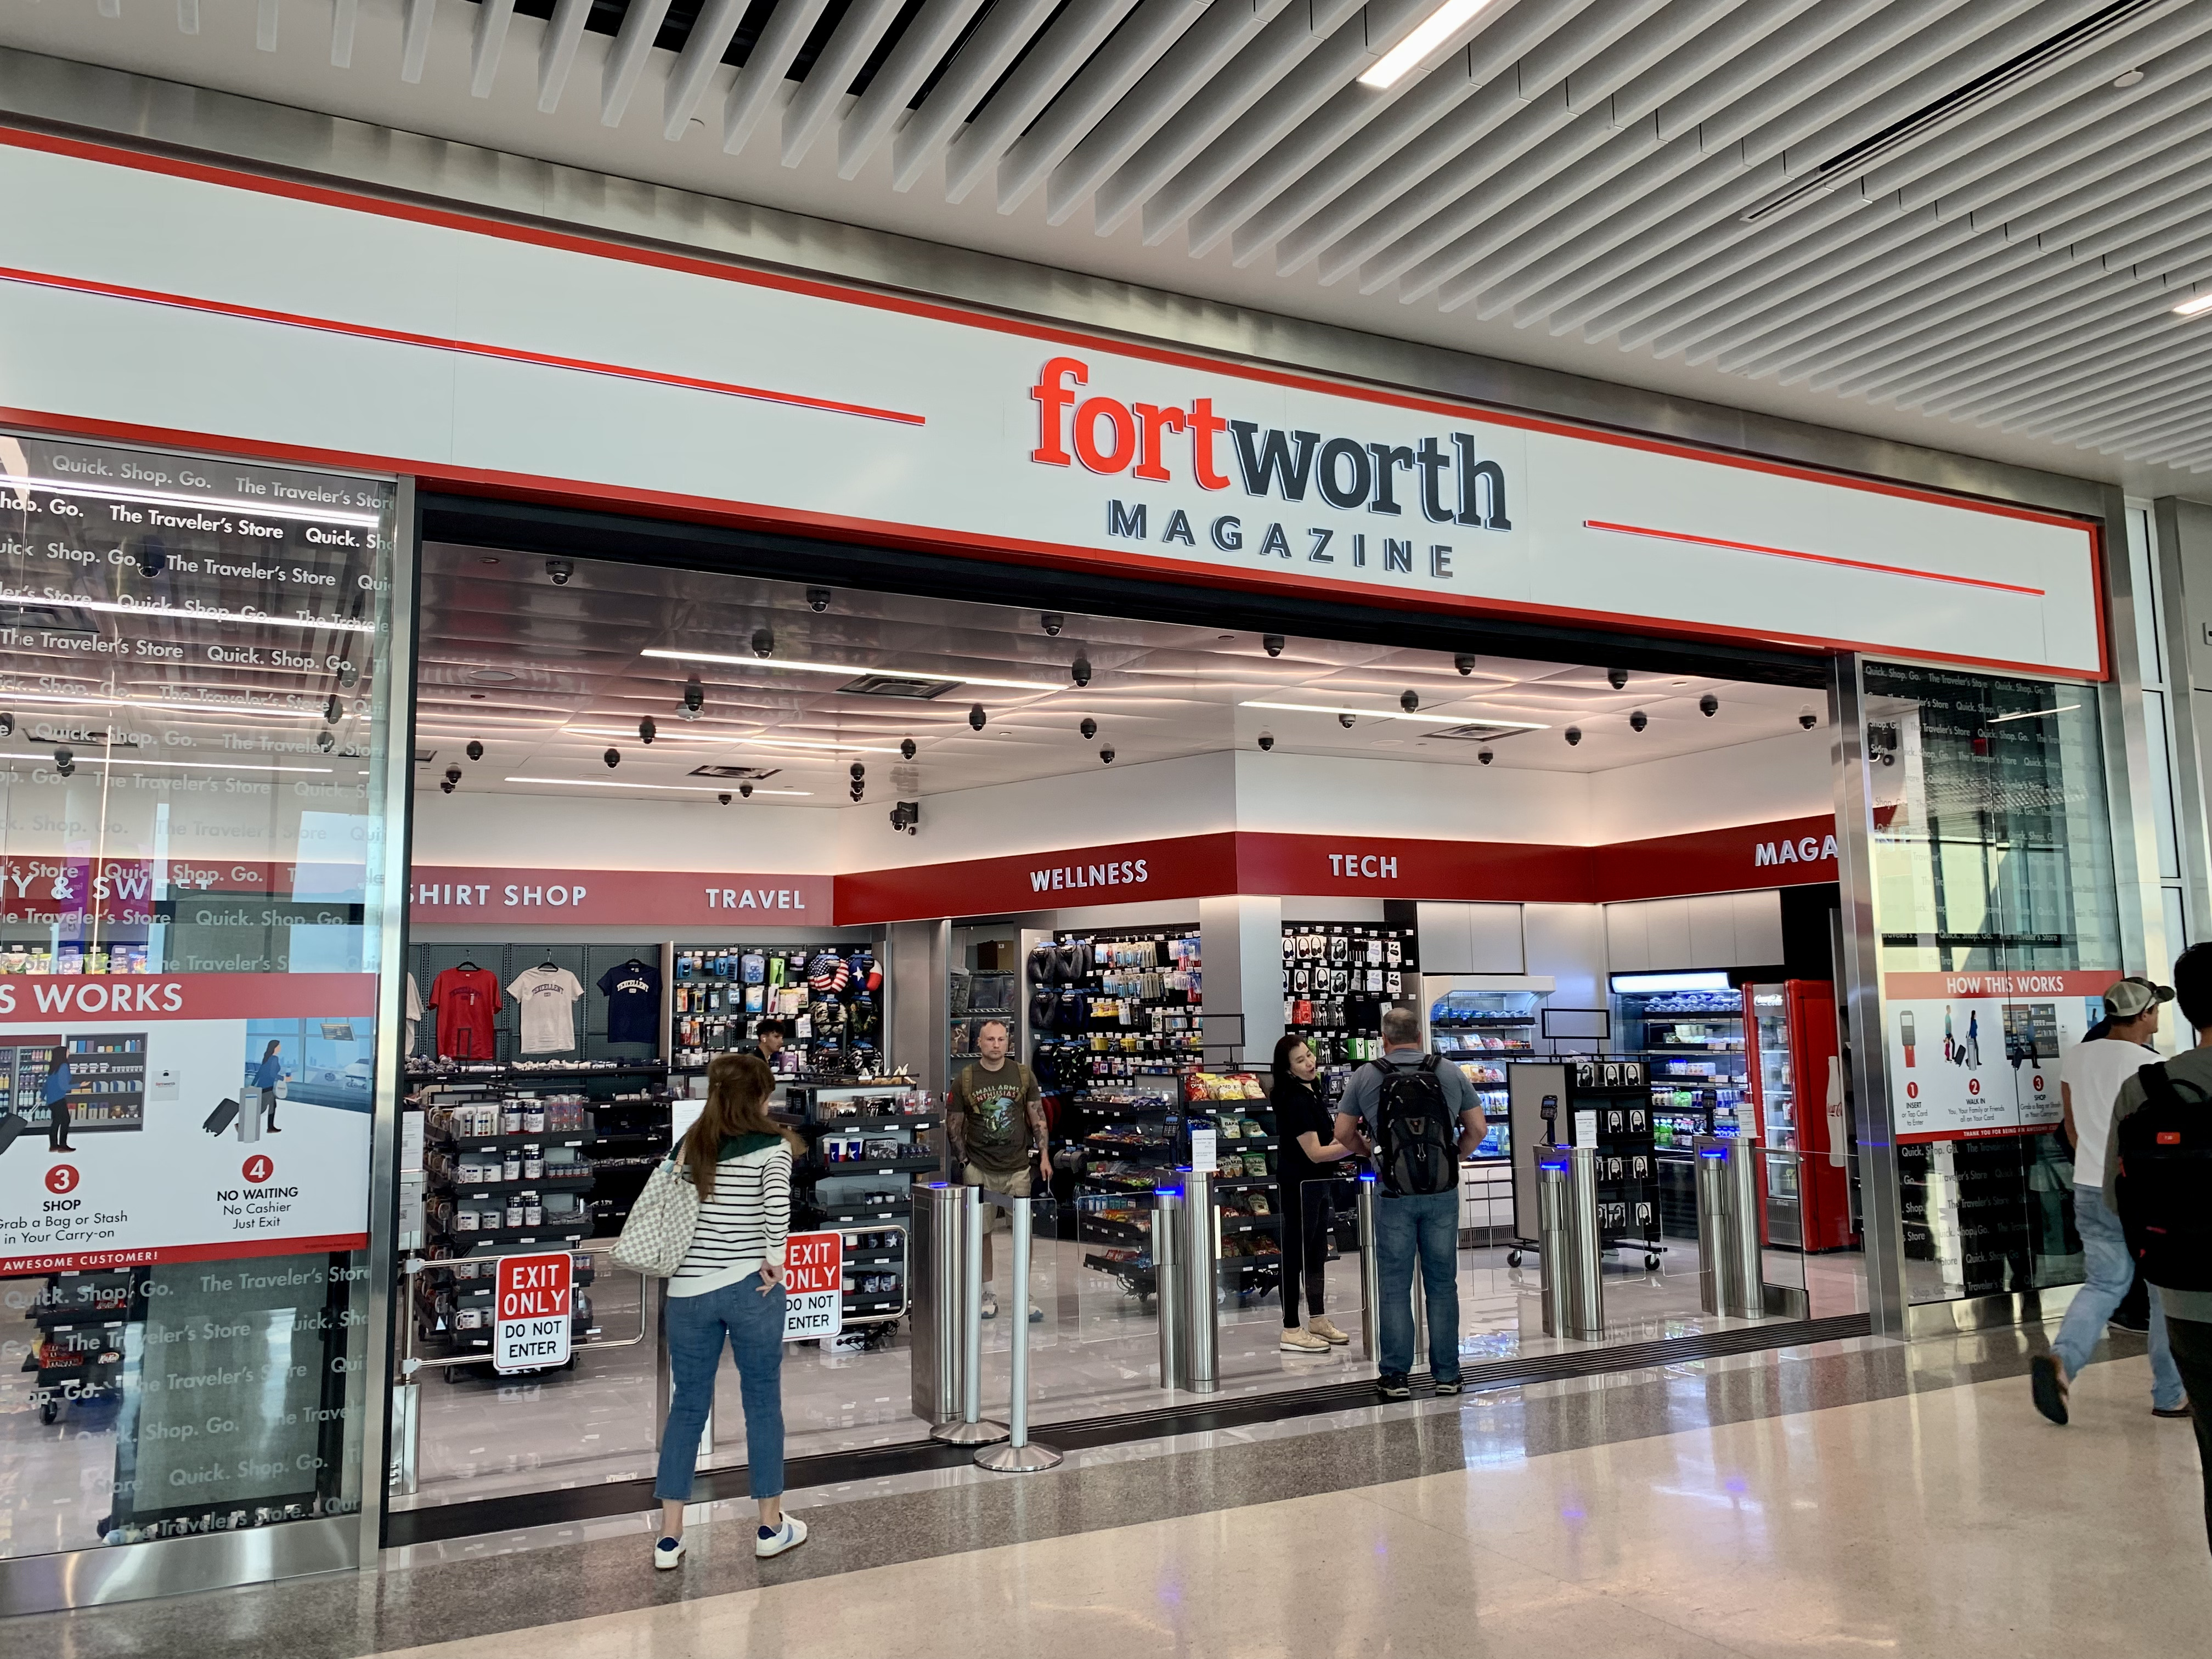 People go in and out of the exterior of an airport magazine and candy shop, with a sign that reads: “Fort Worth Magazine,”